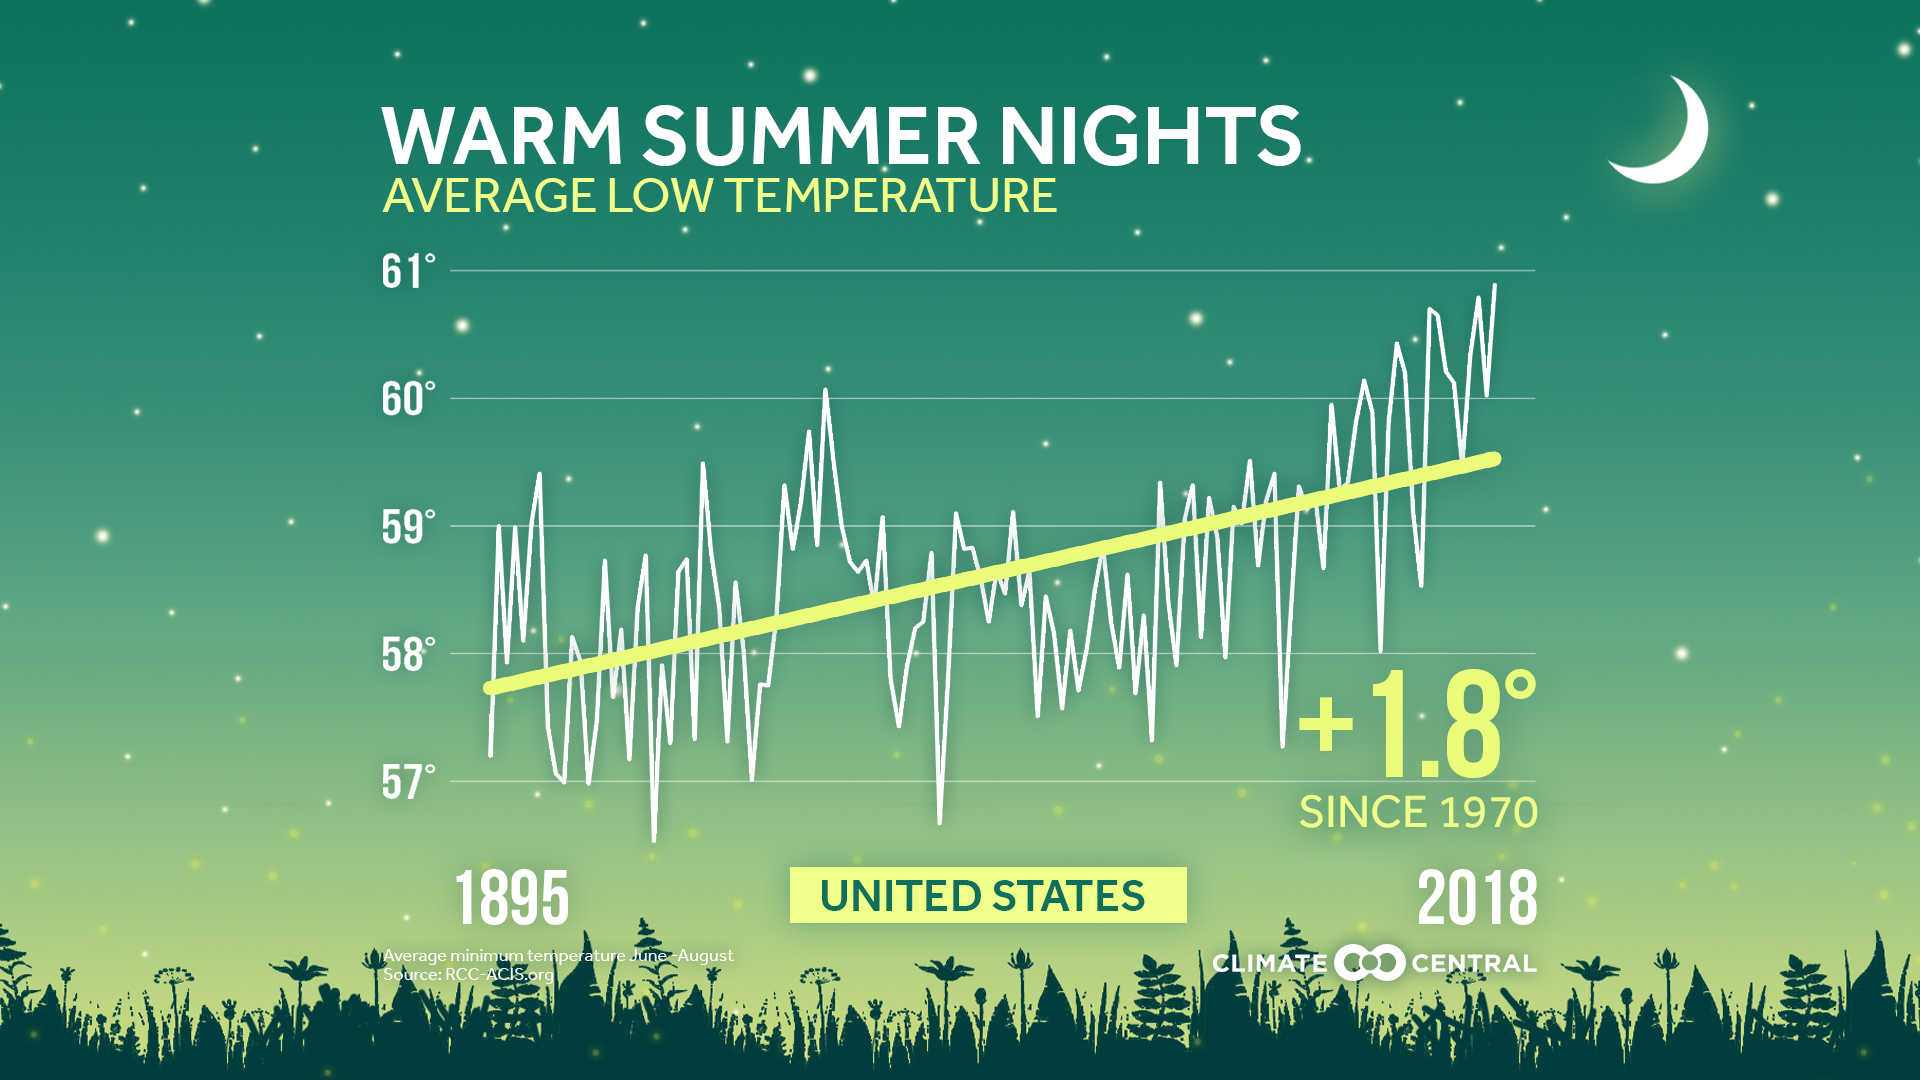 Forecast Change: Summer nights are getting warmer